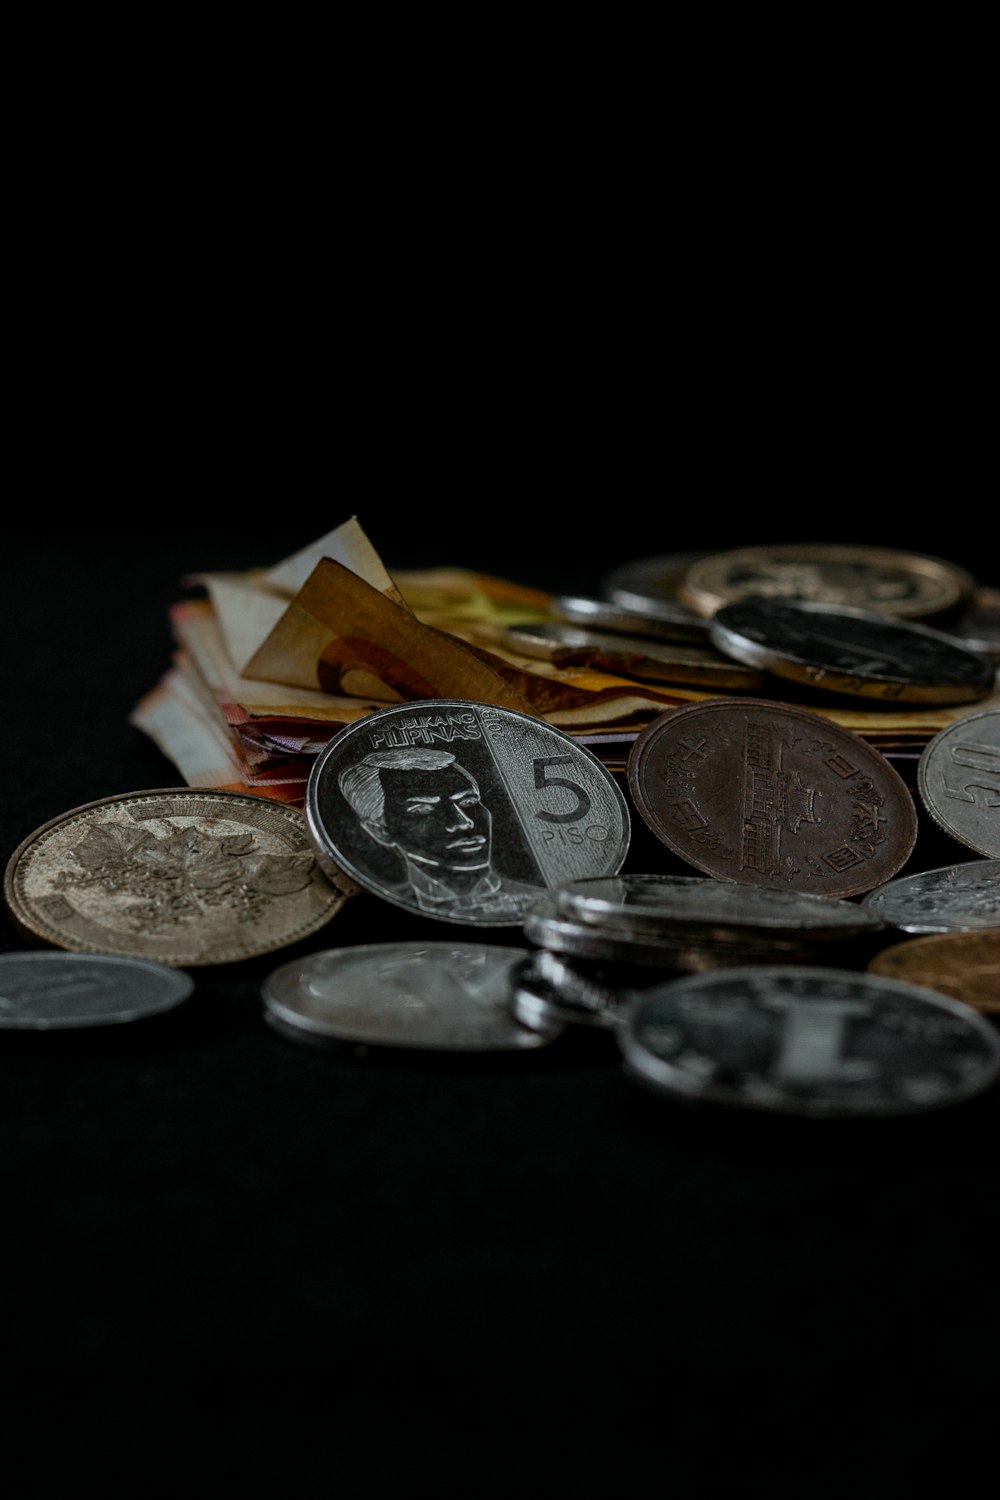 silver and gold coins on black surface